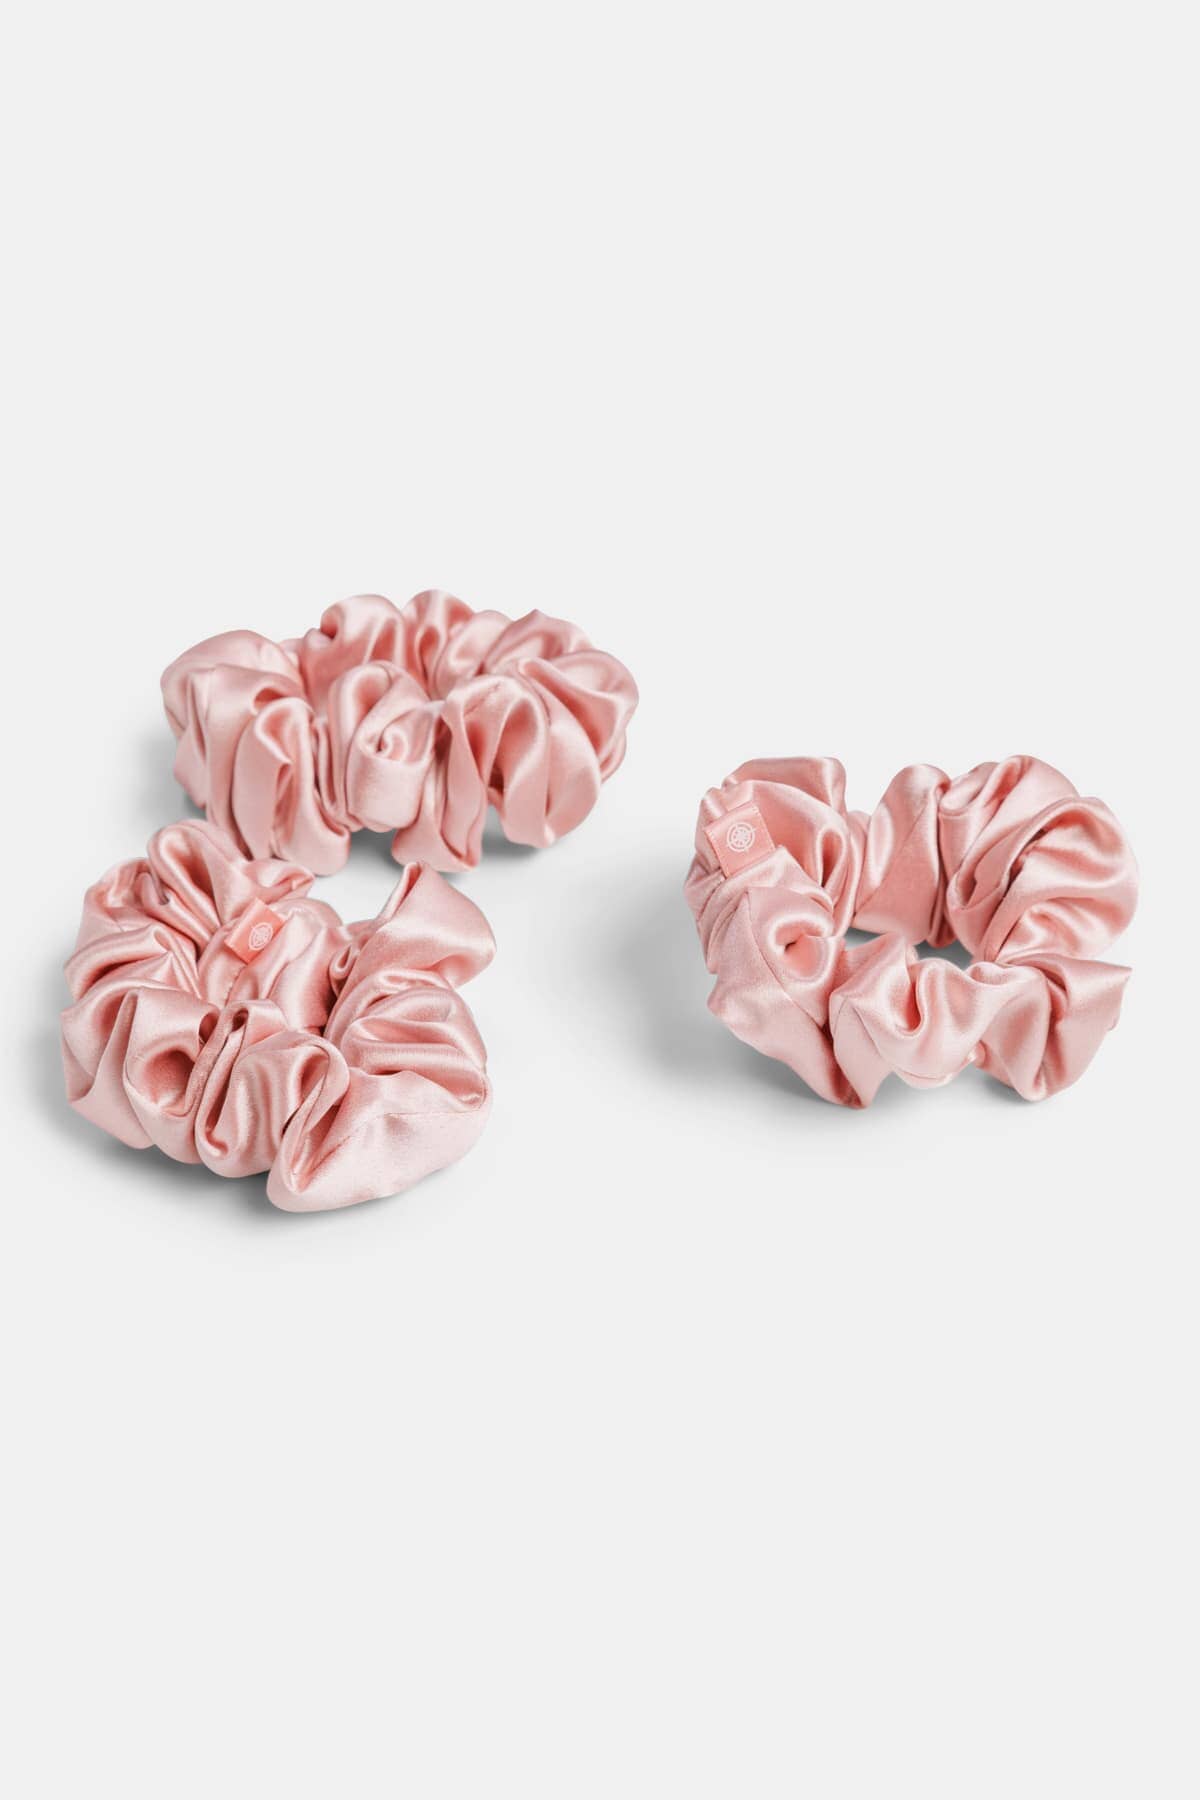 100% Pure Mulberry Silk Hair Scrunchies with Gift Box - Set of 3 Large Hair Ties Womens>Beauty>Hair Care Fishers Finery 